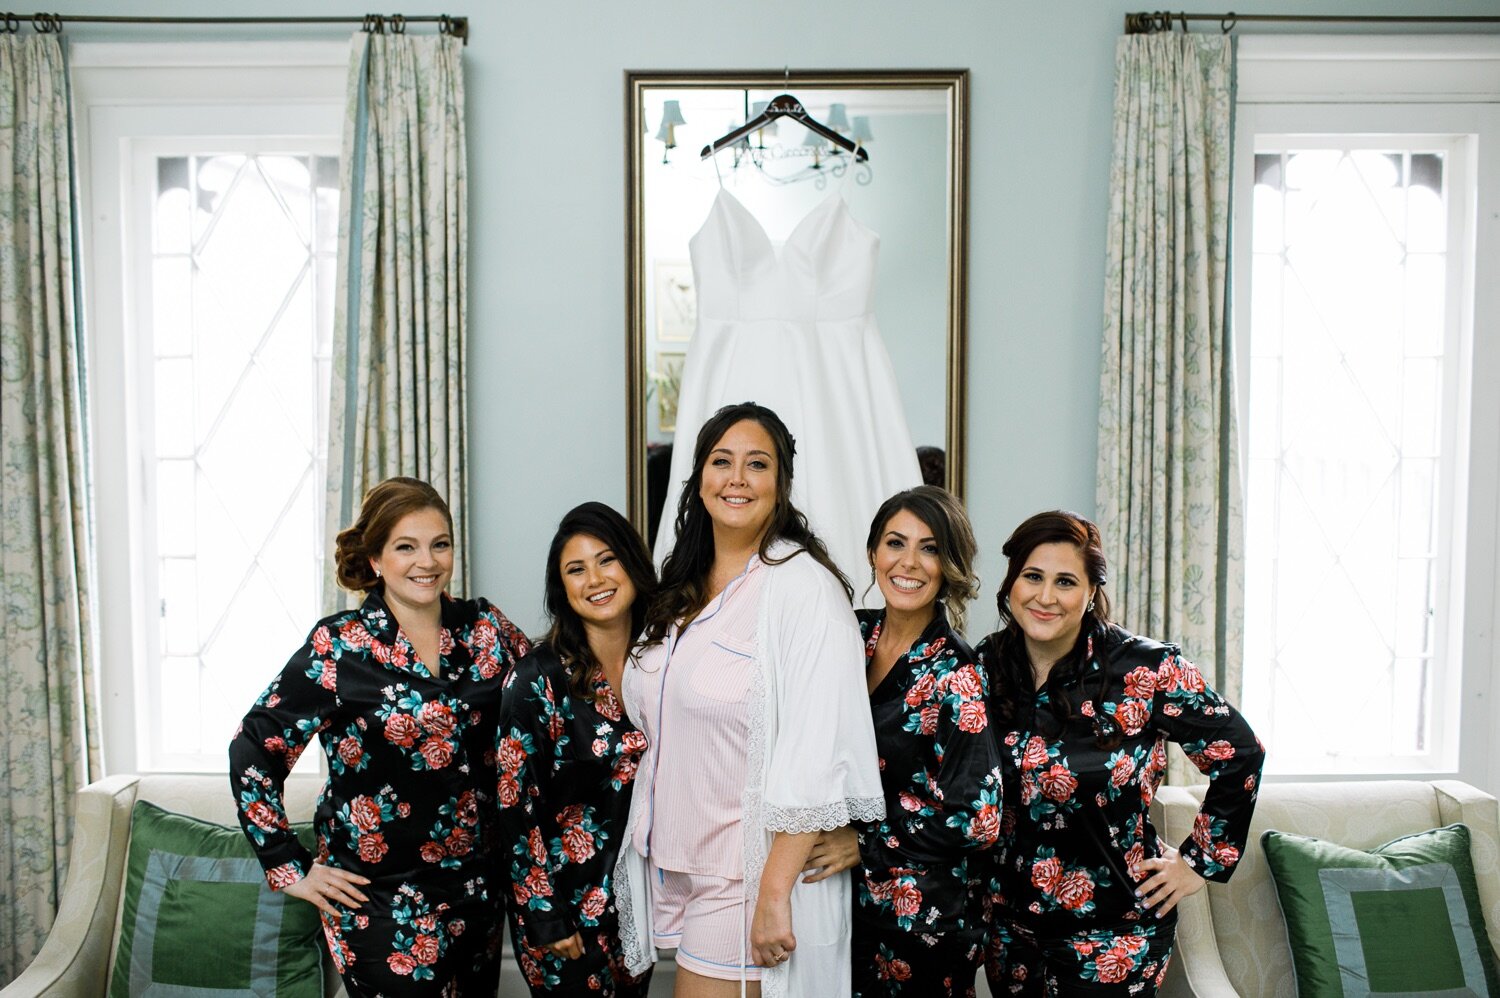 18_Bridesmaids at Whitby Castle wedding in Rye NY.jpg